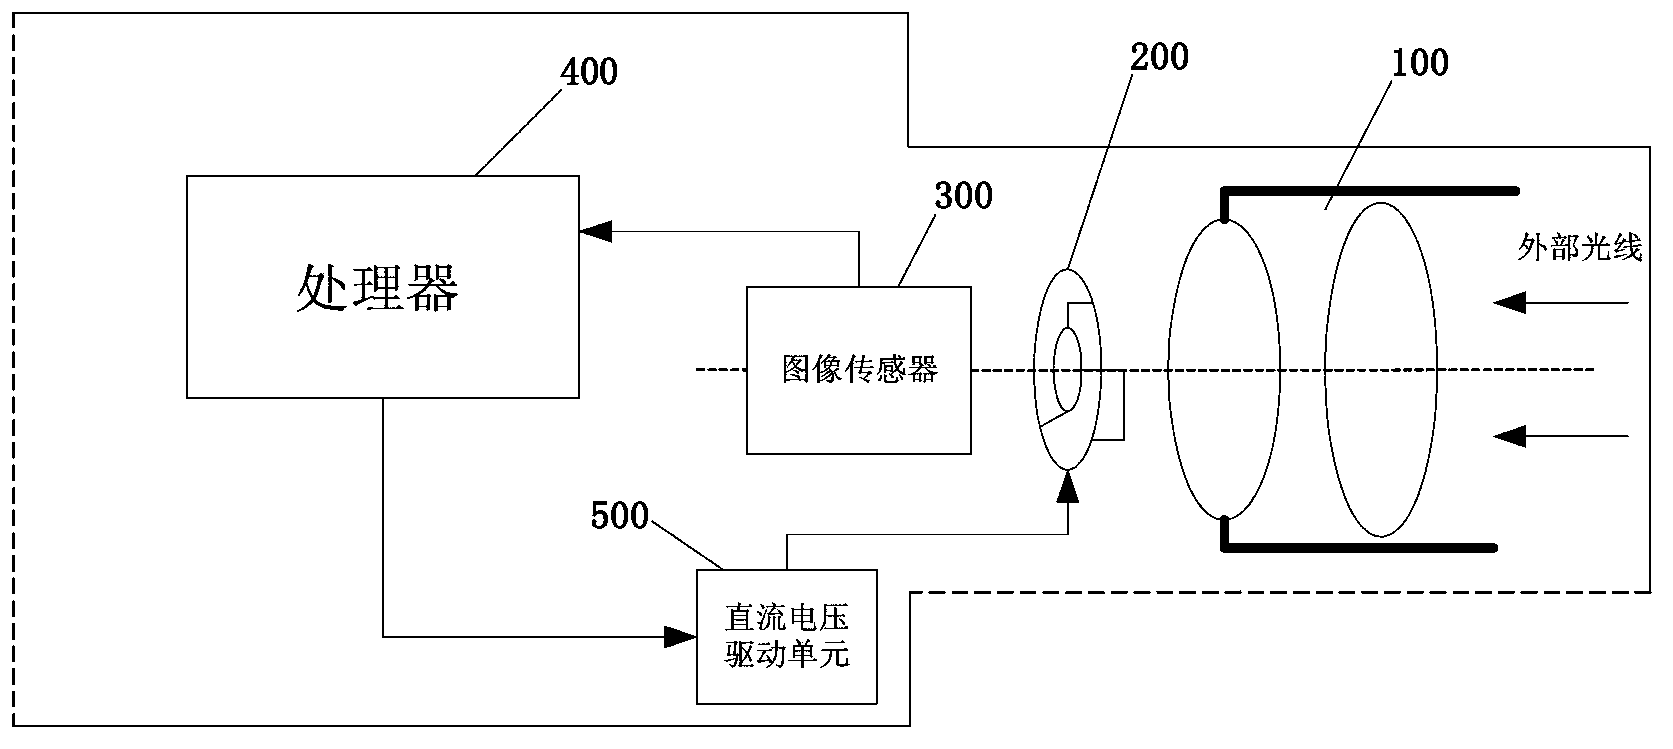 Automatic diaphragm control method and system